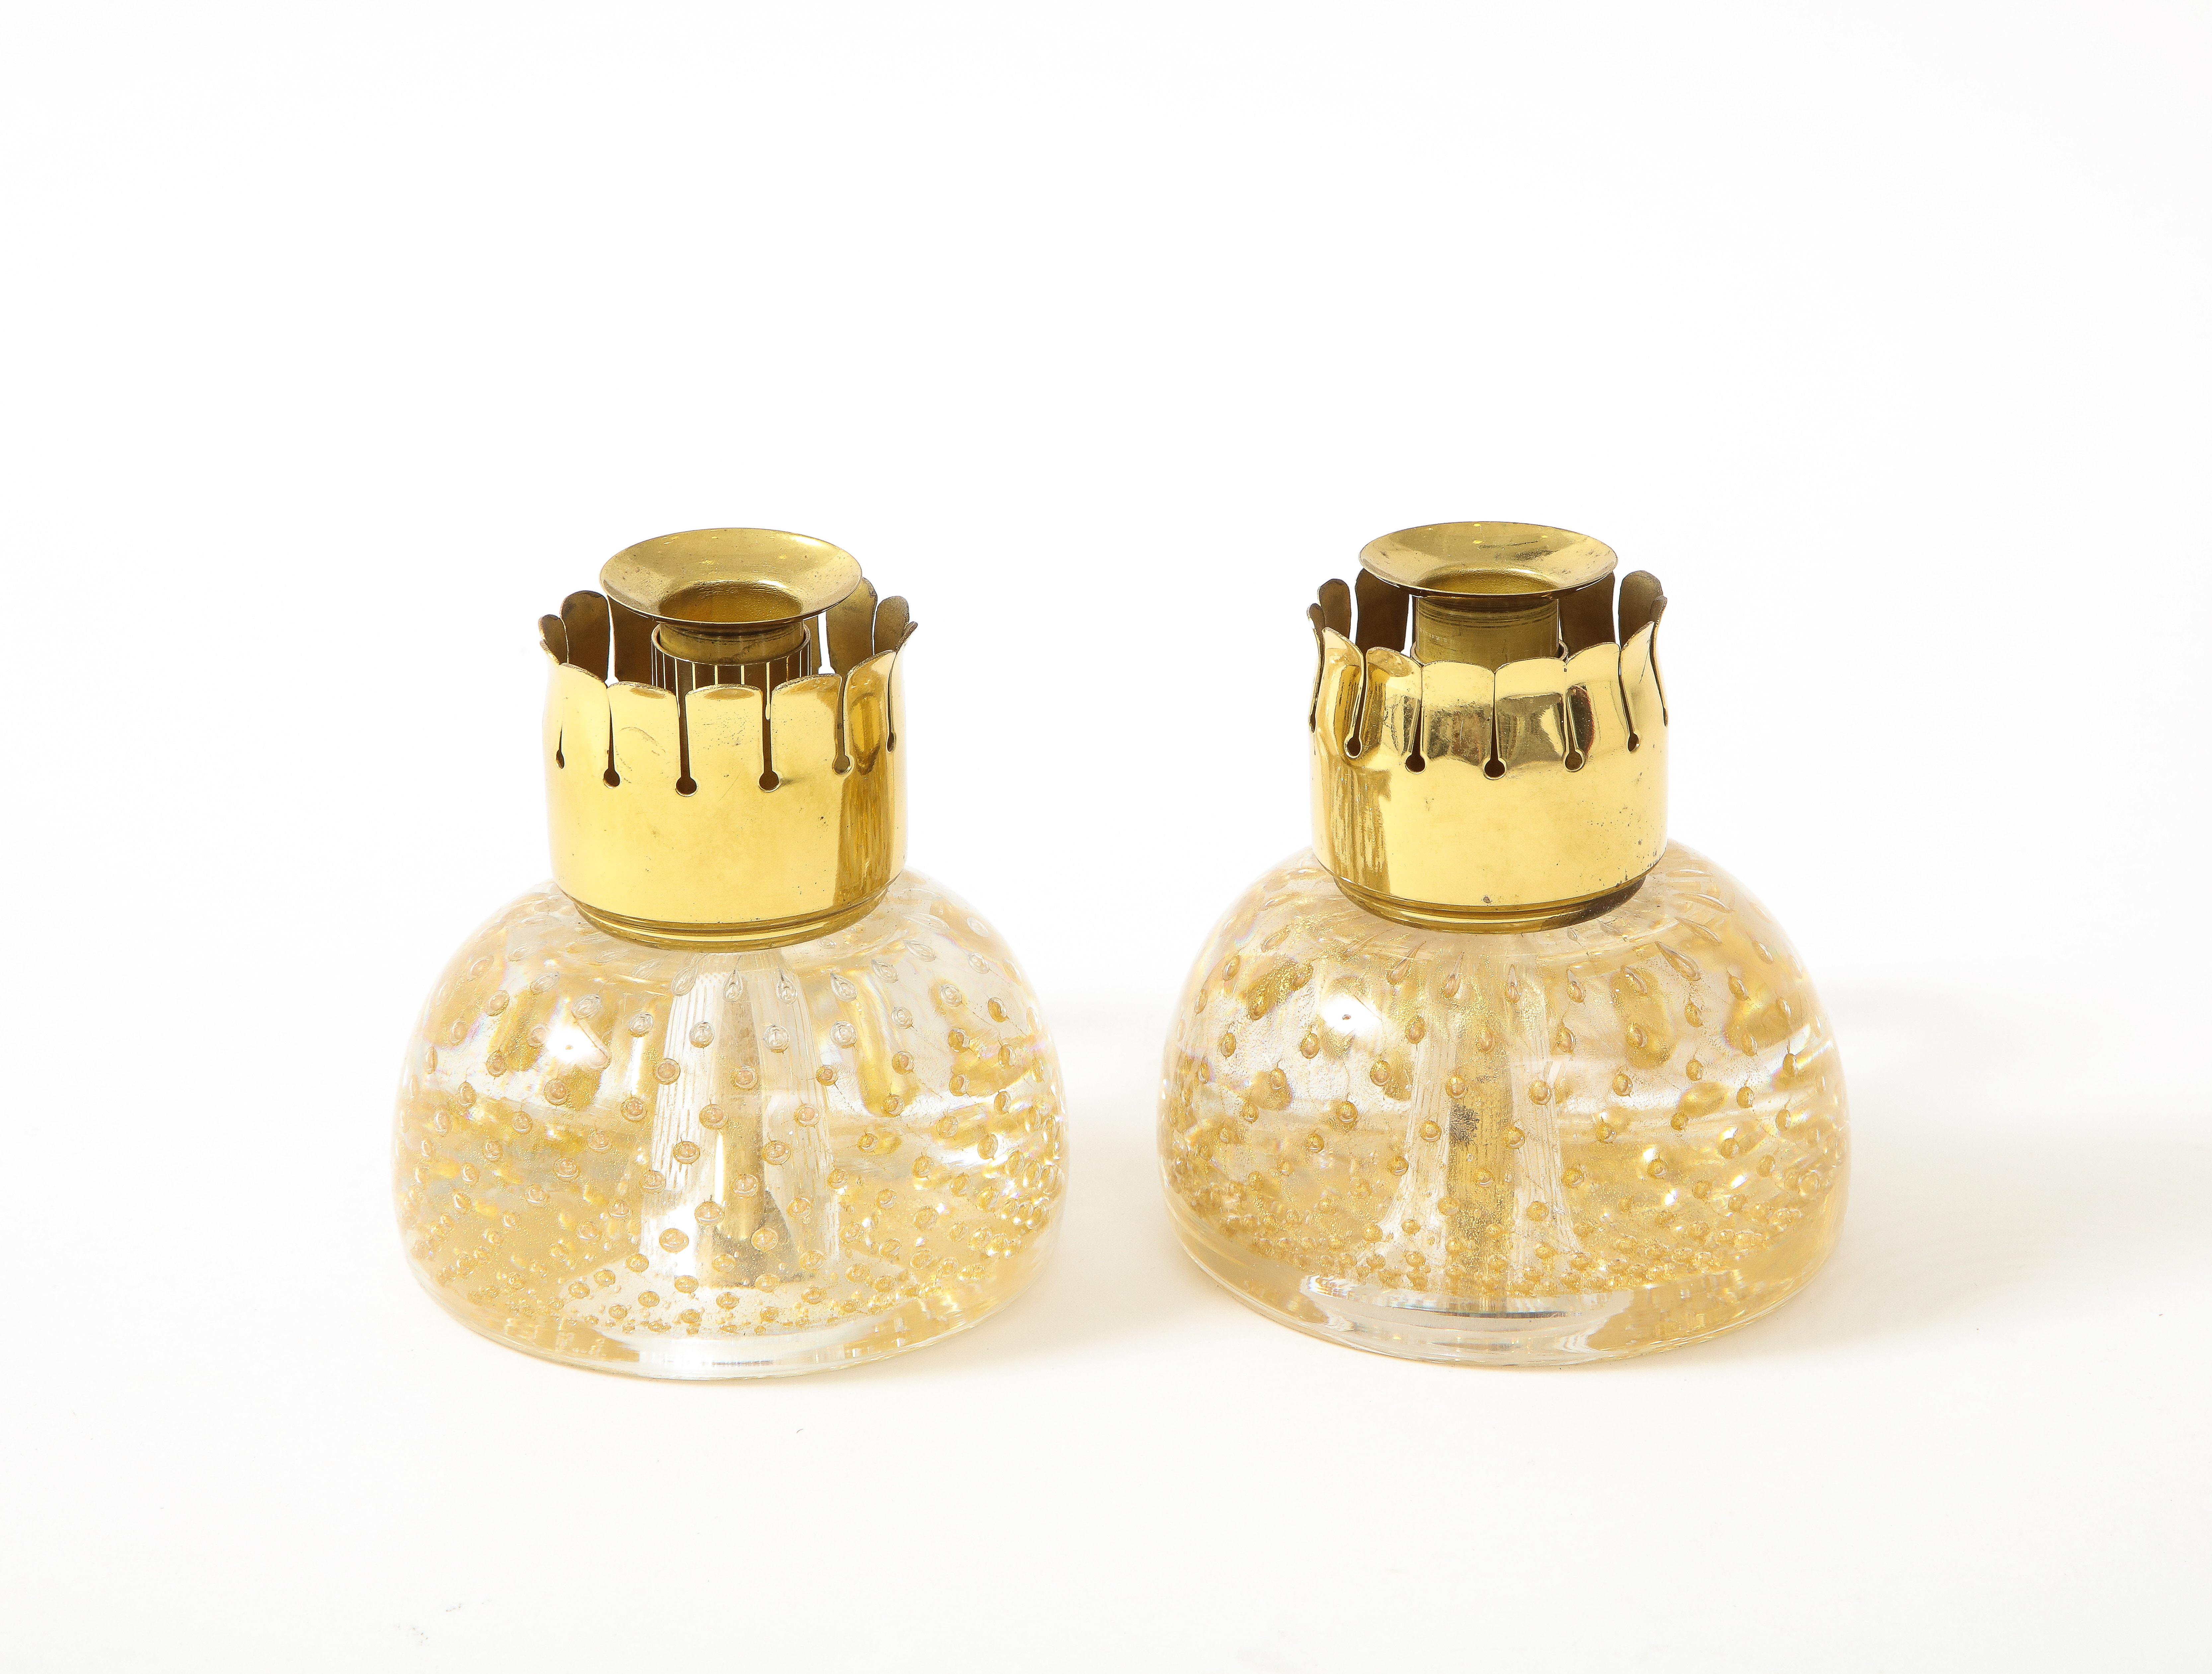 Italian Seguso Pair of Candle Holders in Transparent Glass & Gold Leaf Inclusions, 1950s For Sale